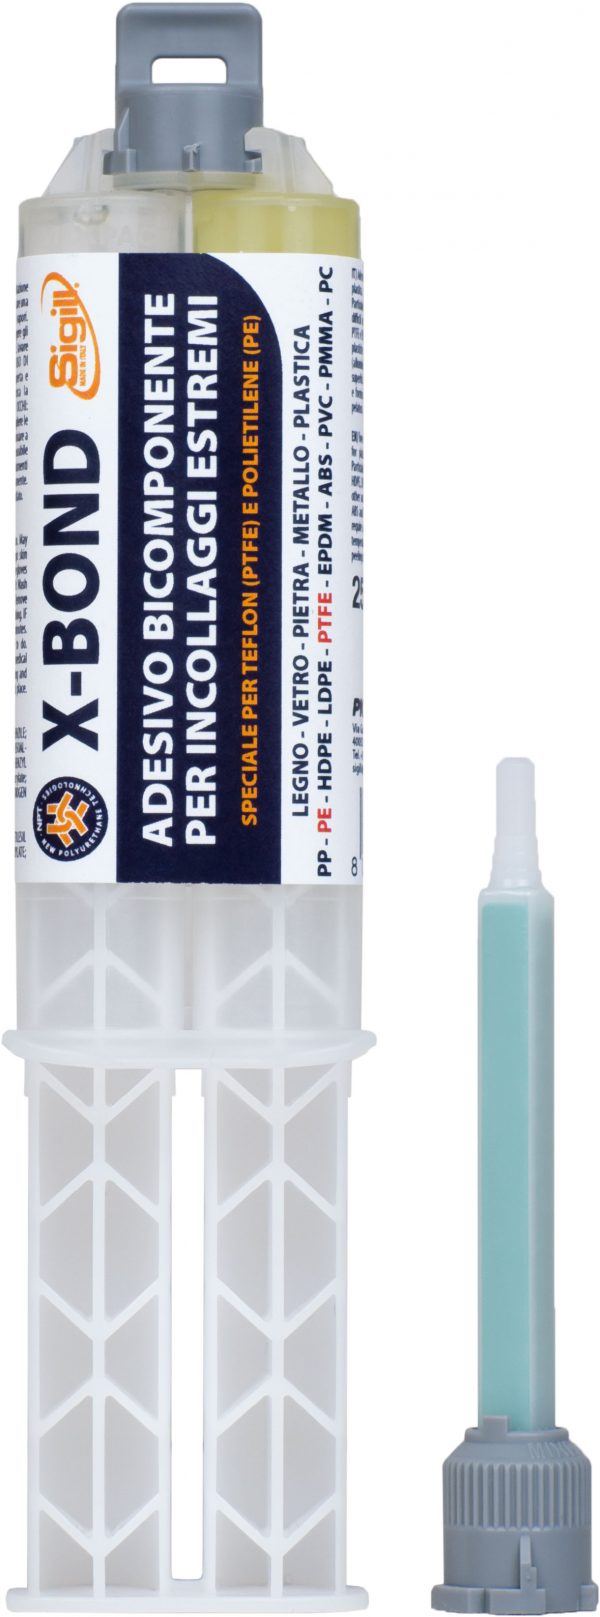 X-BOND Two-component adhesive